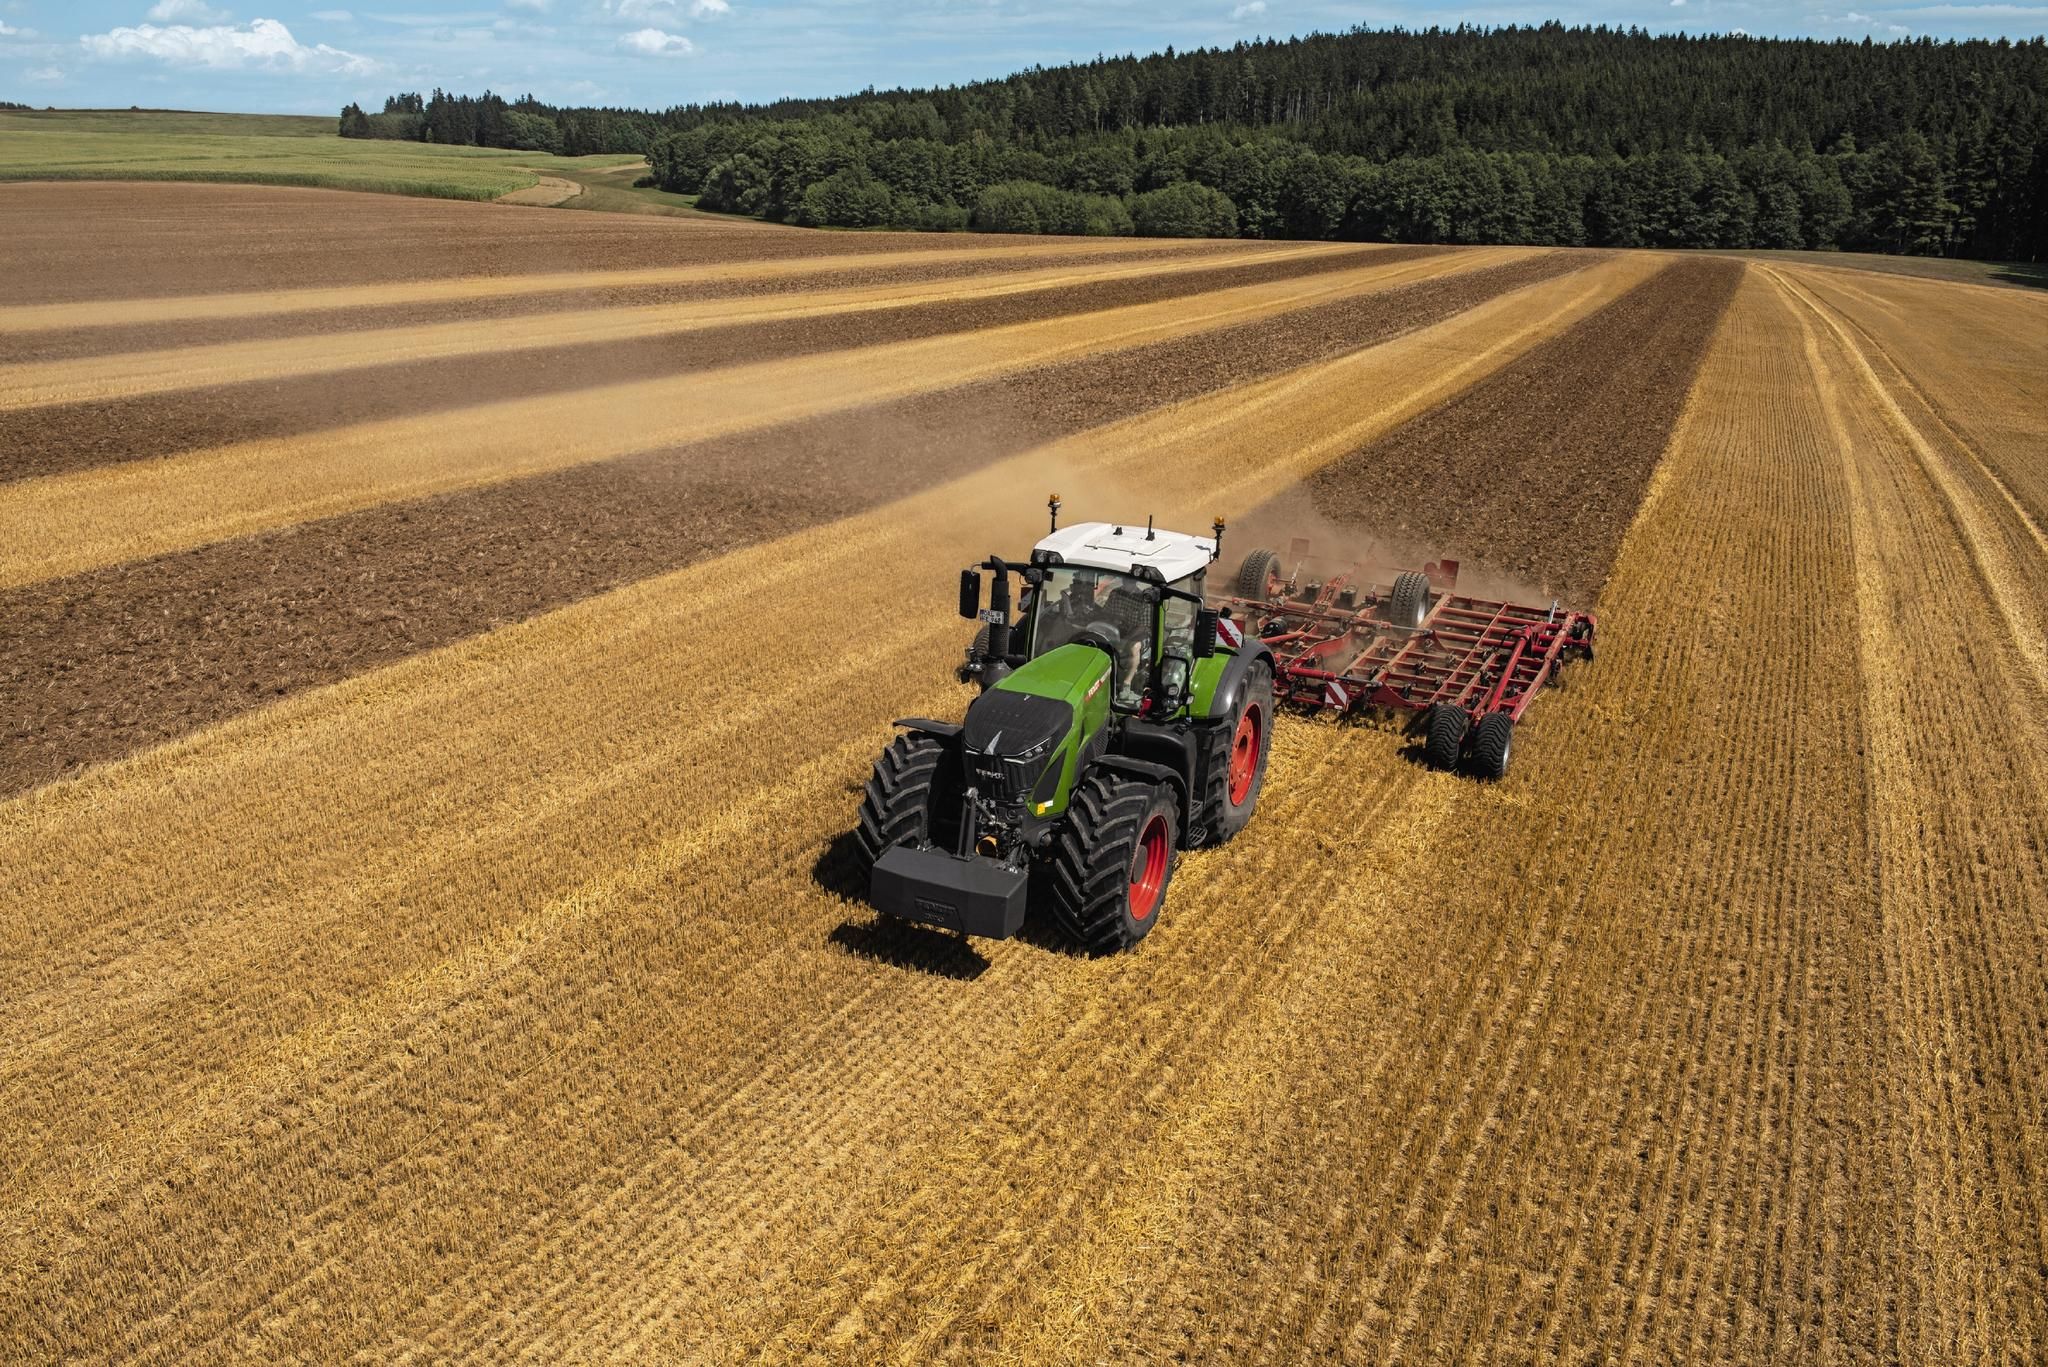 Are you Ready for More? – Fendt sets the bar higher still